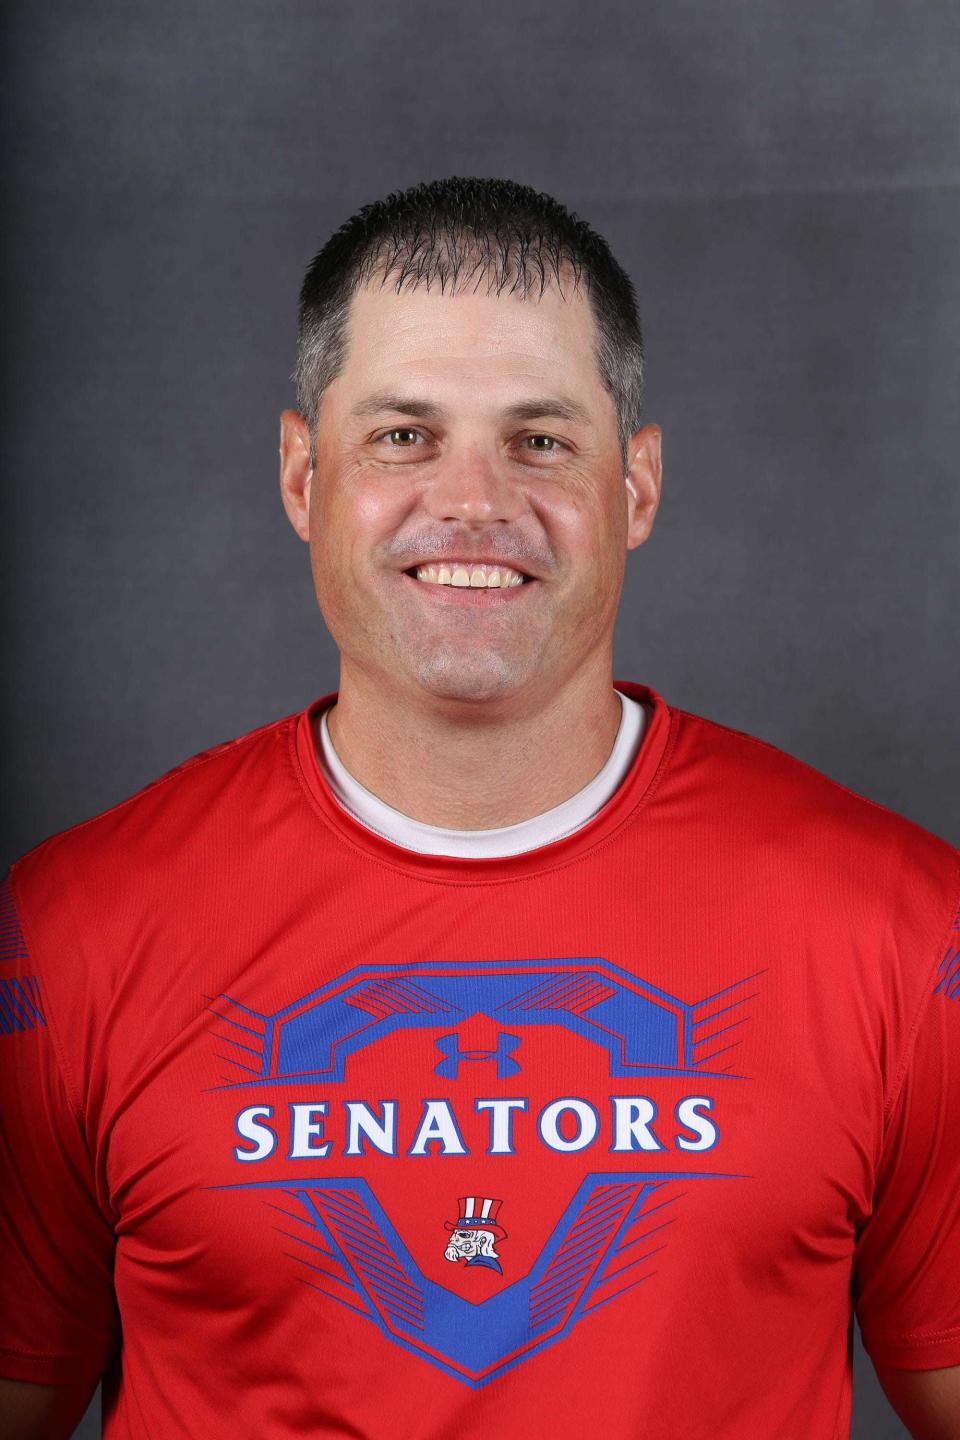 Phillip Bowsman, West Washington's football coach, died in November 2019 after suffering a stroke during a playoff game.